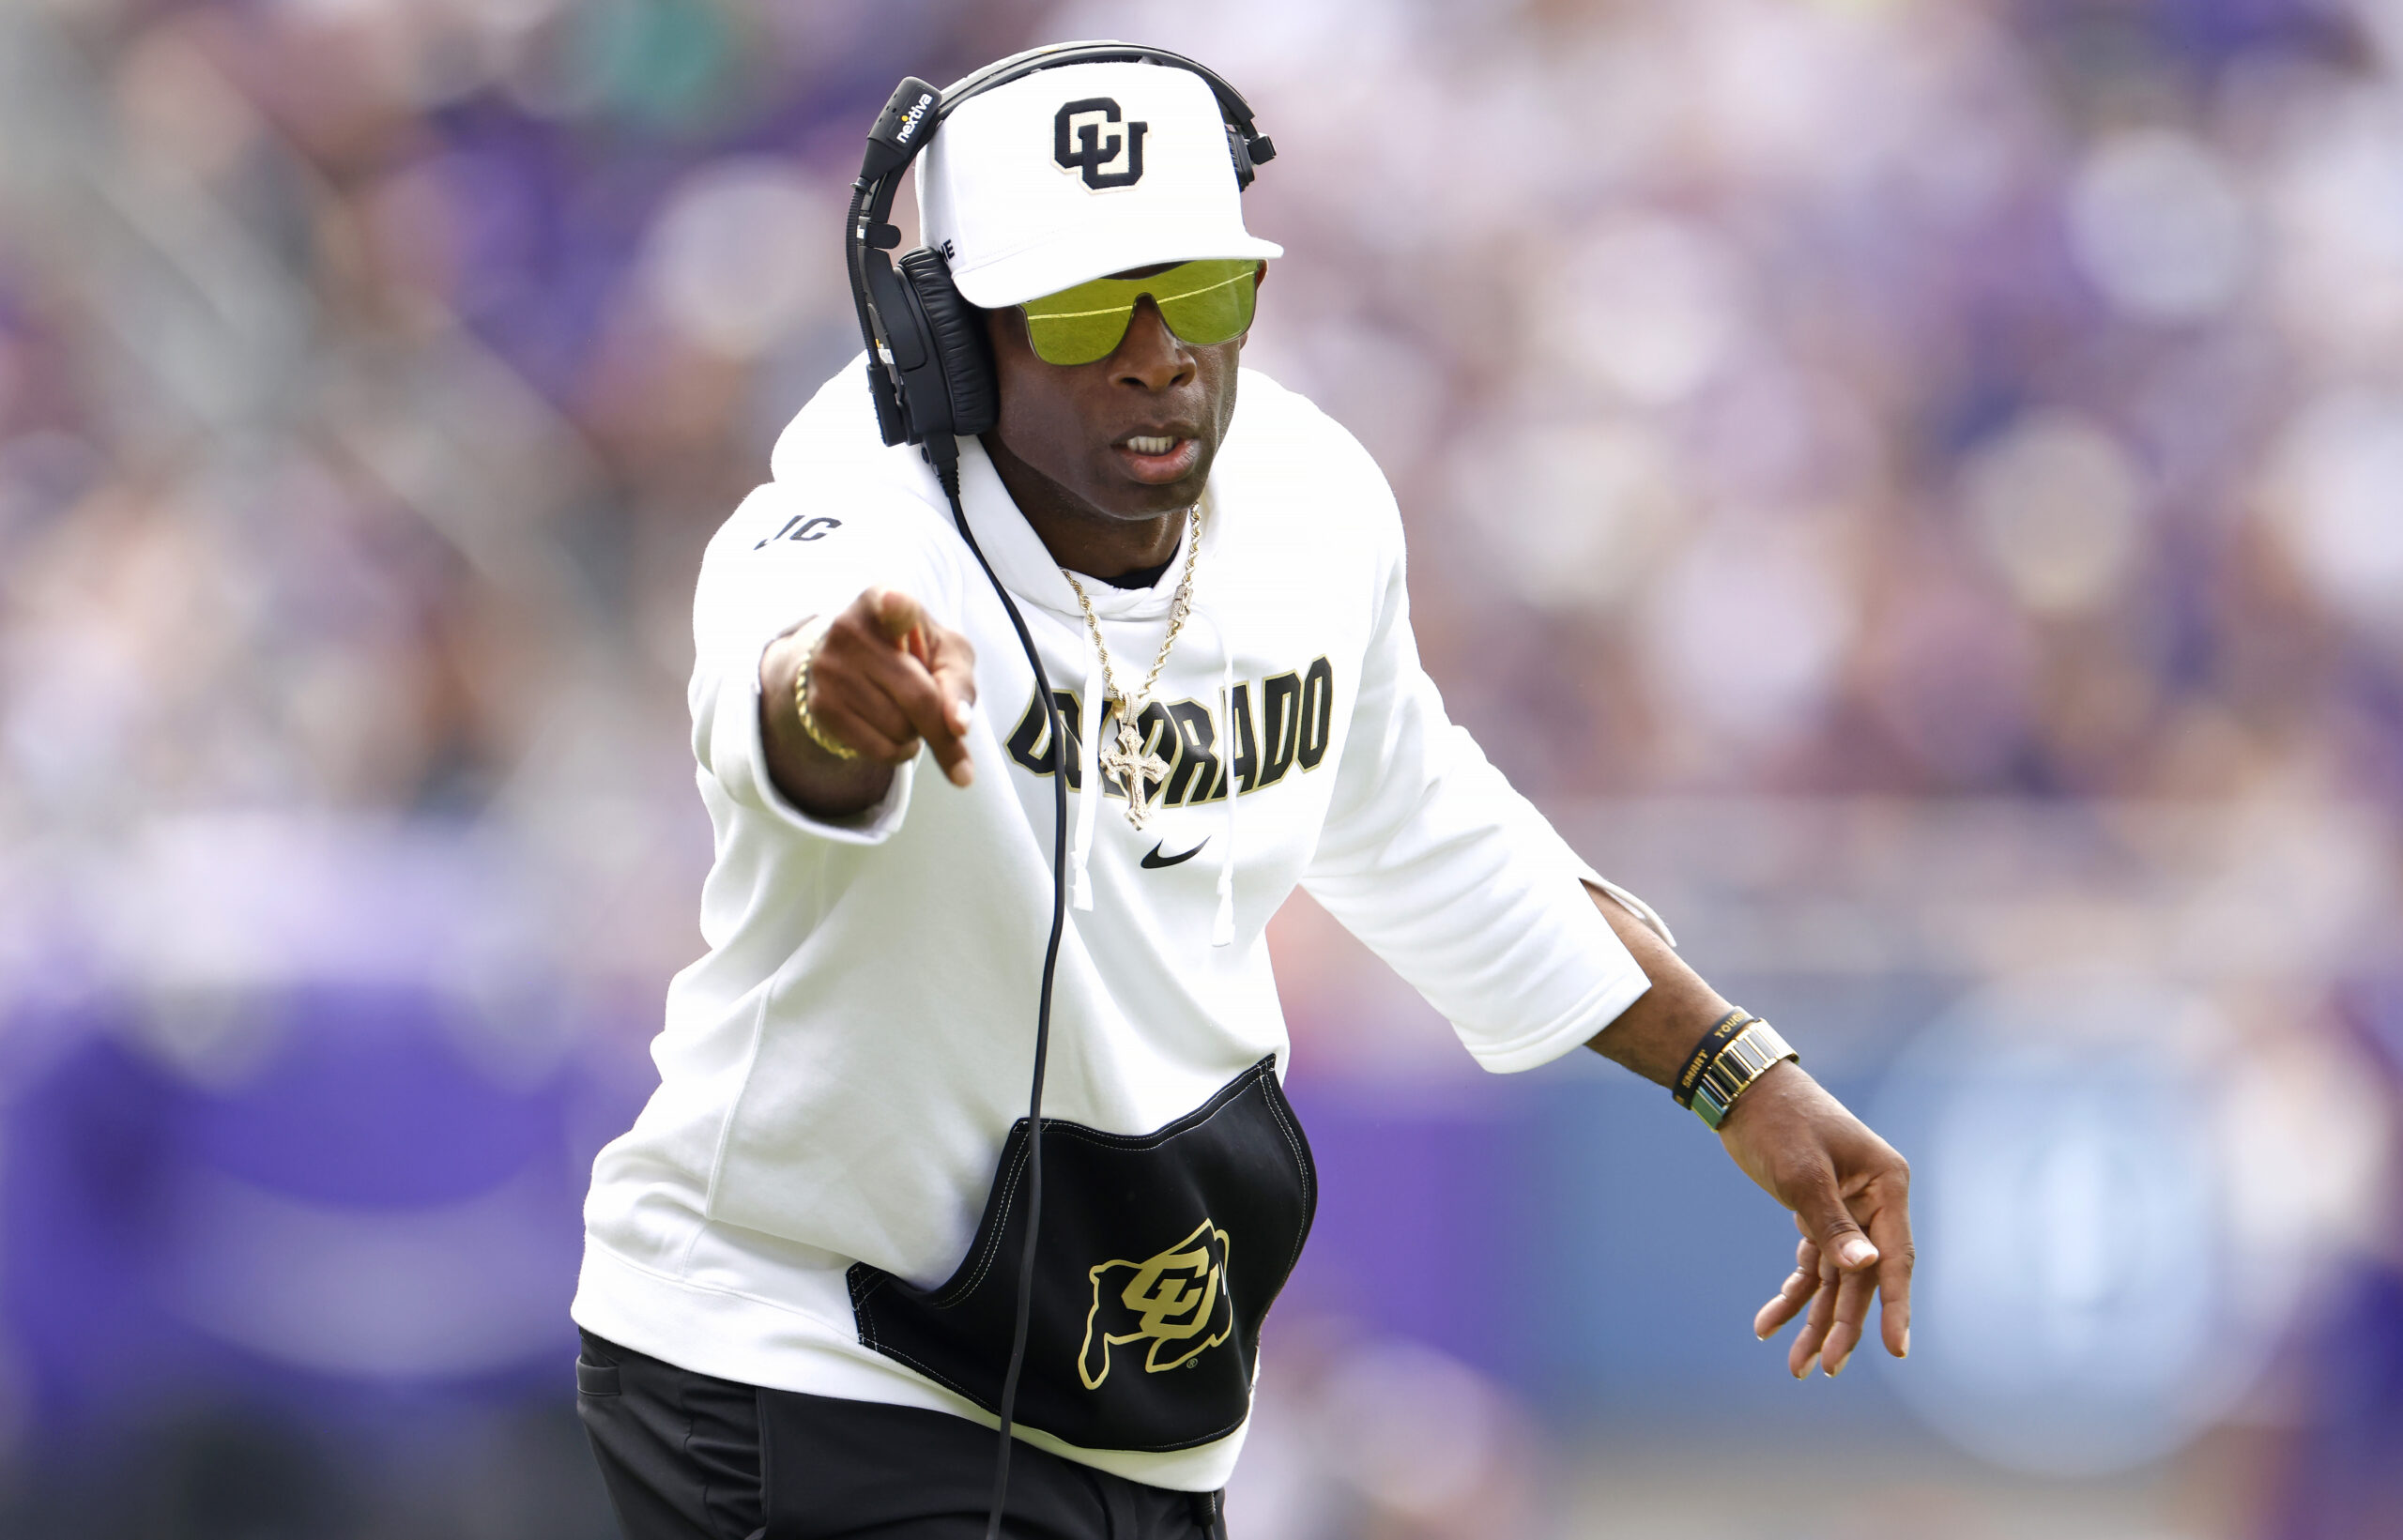 Social media reacts to Coach Prime’s first win leading CU Buffs